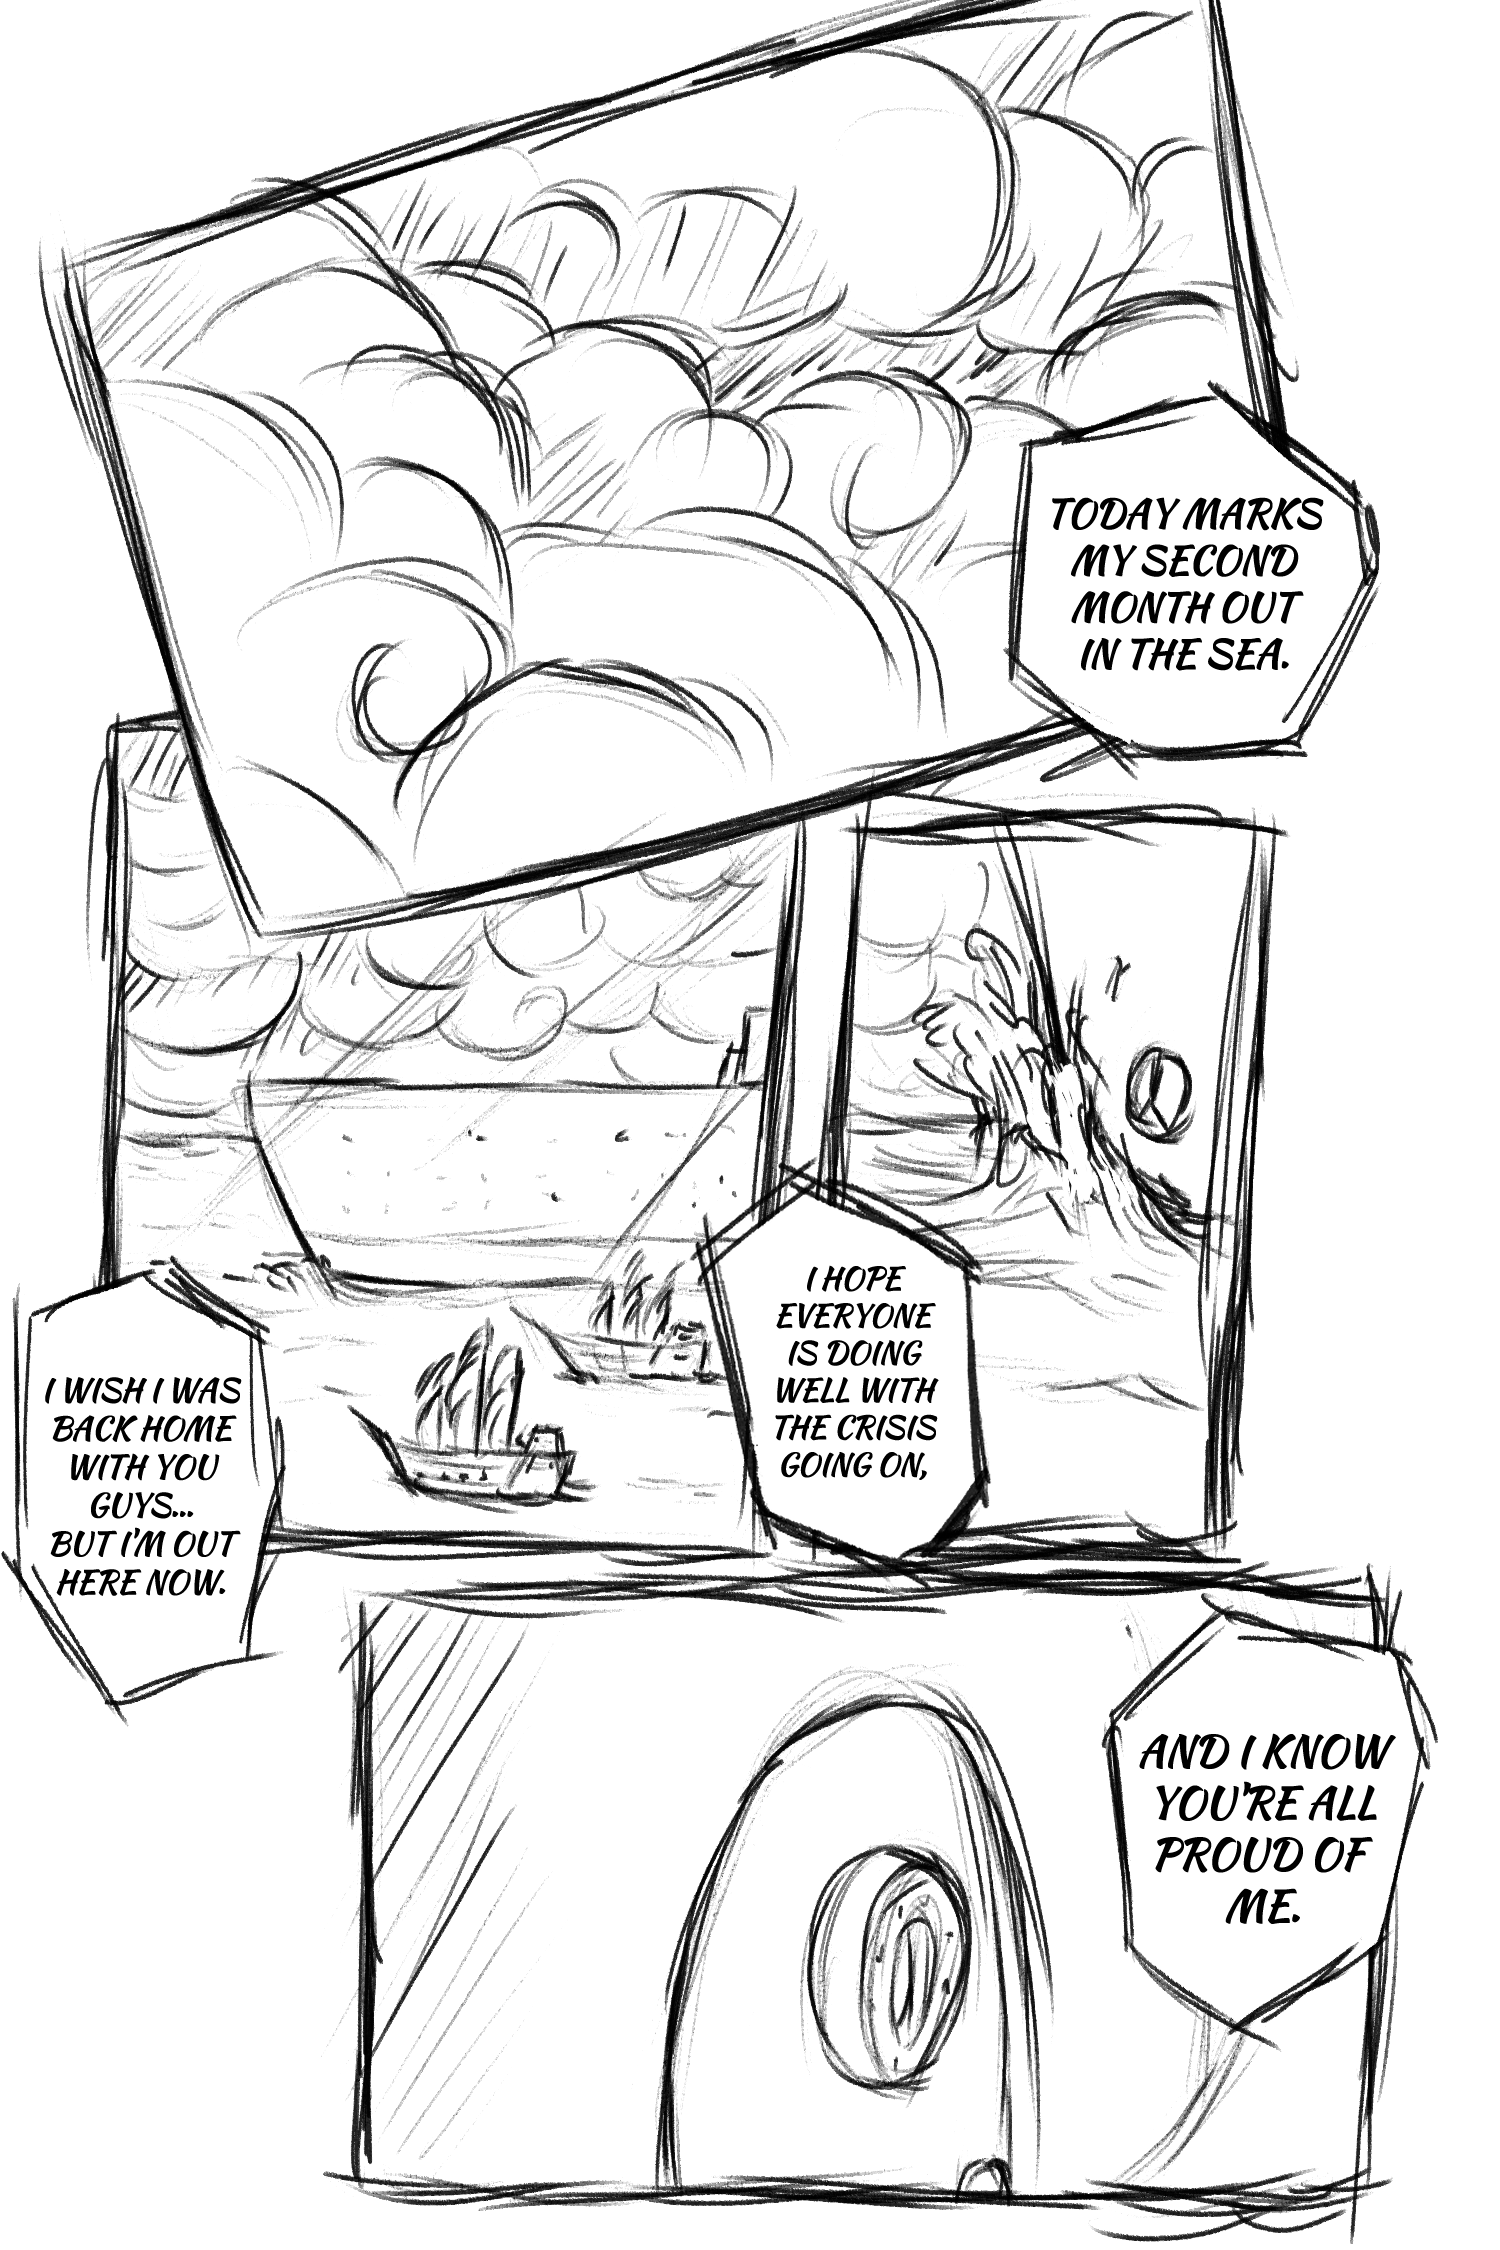 Misenchanted - Page 1